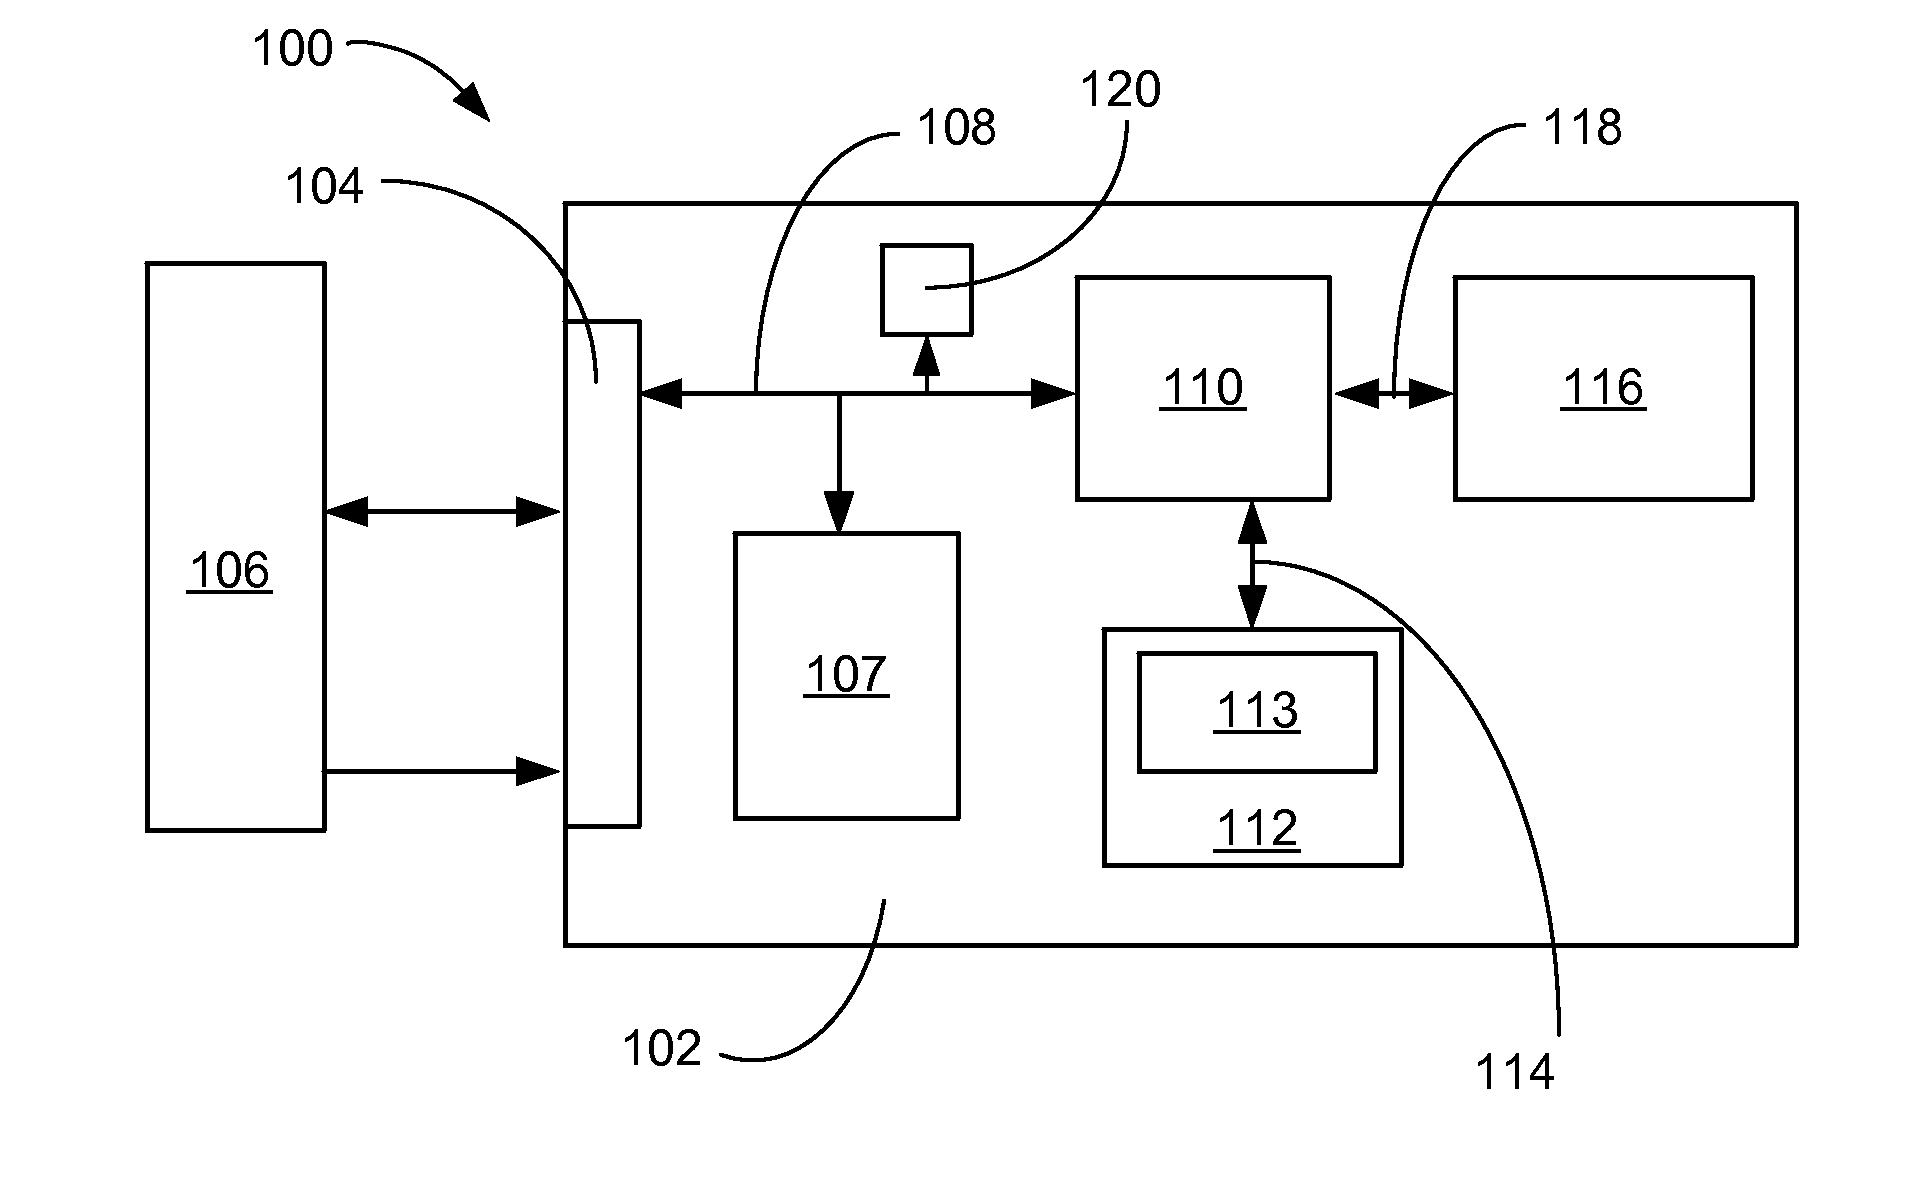 Non-volatile memory management system with time measure mechanism and method of operation thereof